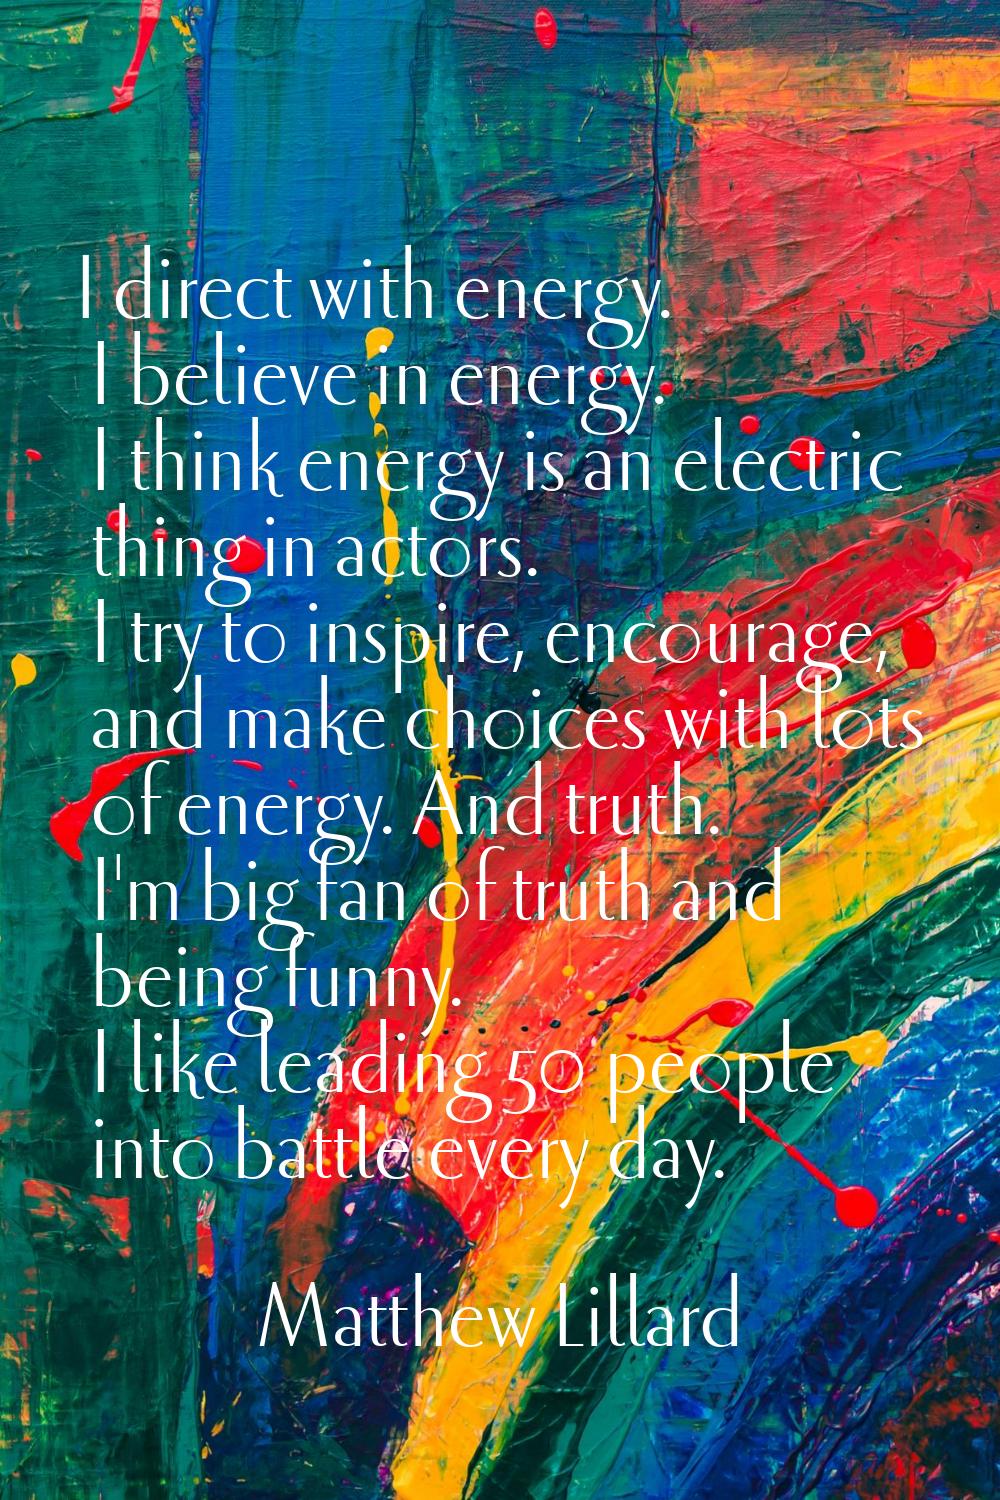 I direct with energy. I believe in energy. I think energy is an electric thing in actors. I try to 